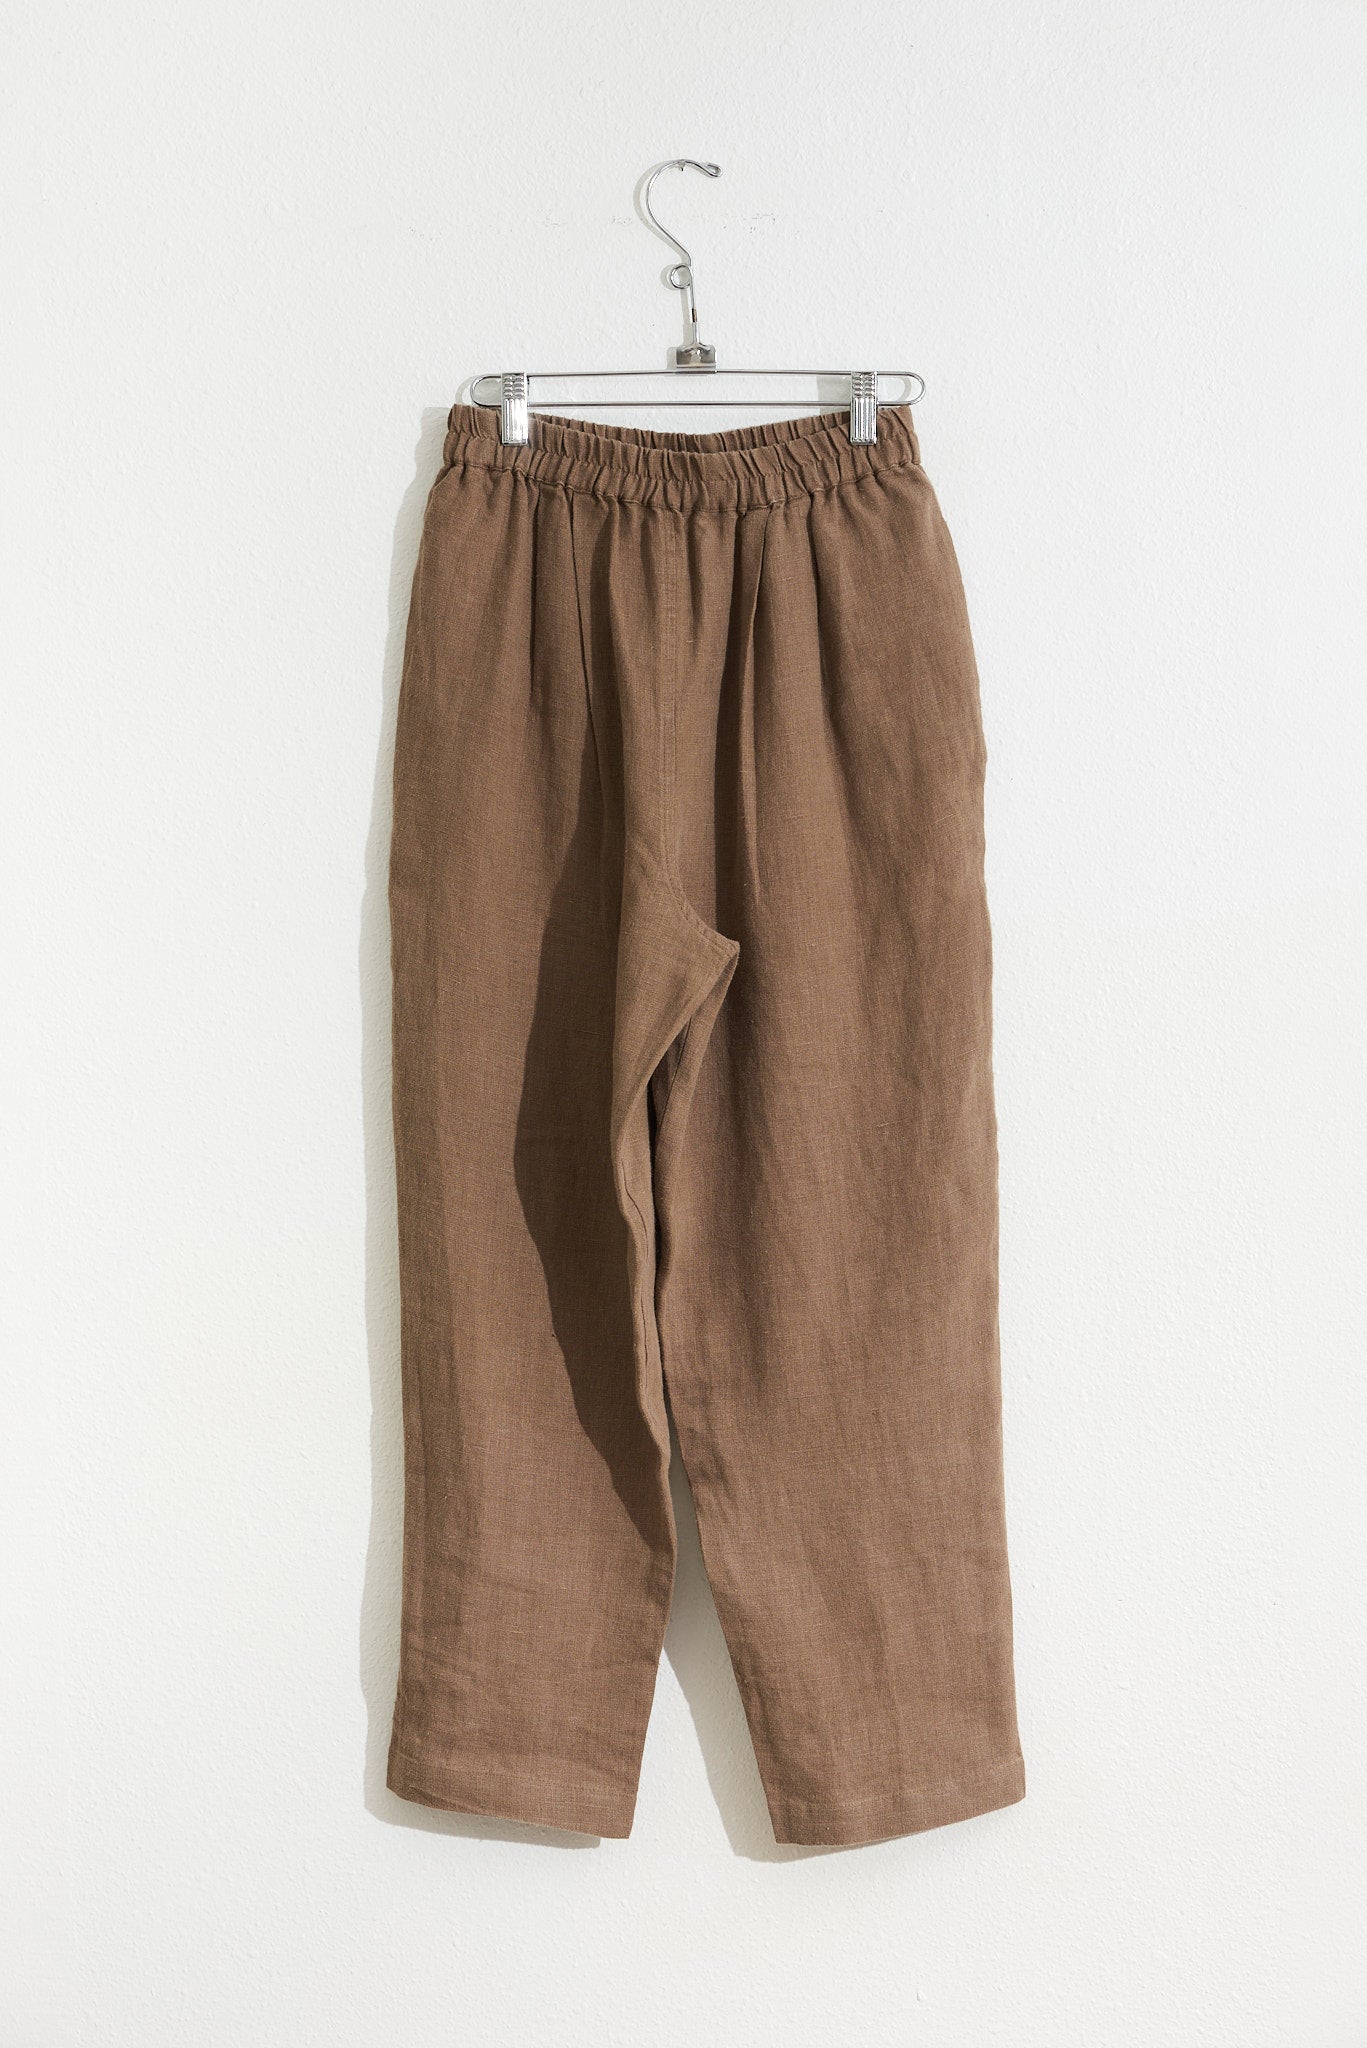 Everyday Narrow Trouser in Laundered Cocoa